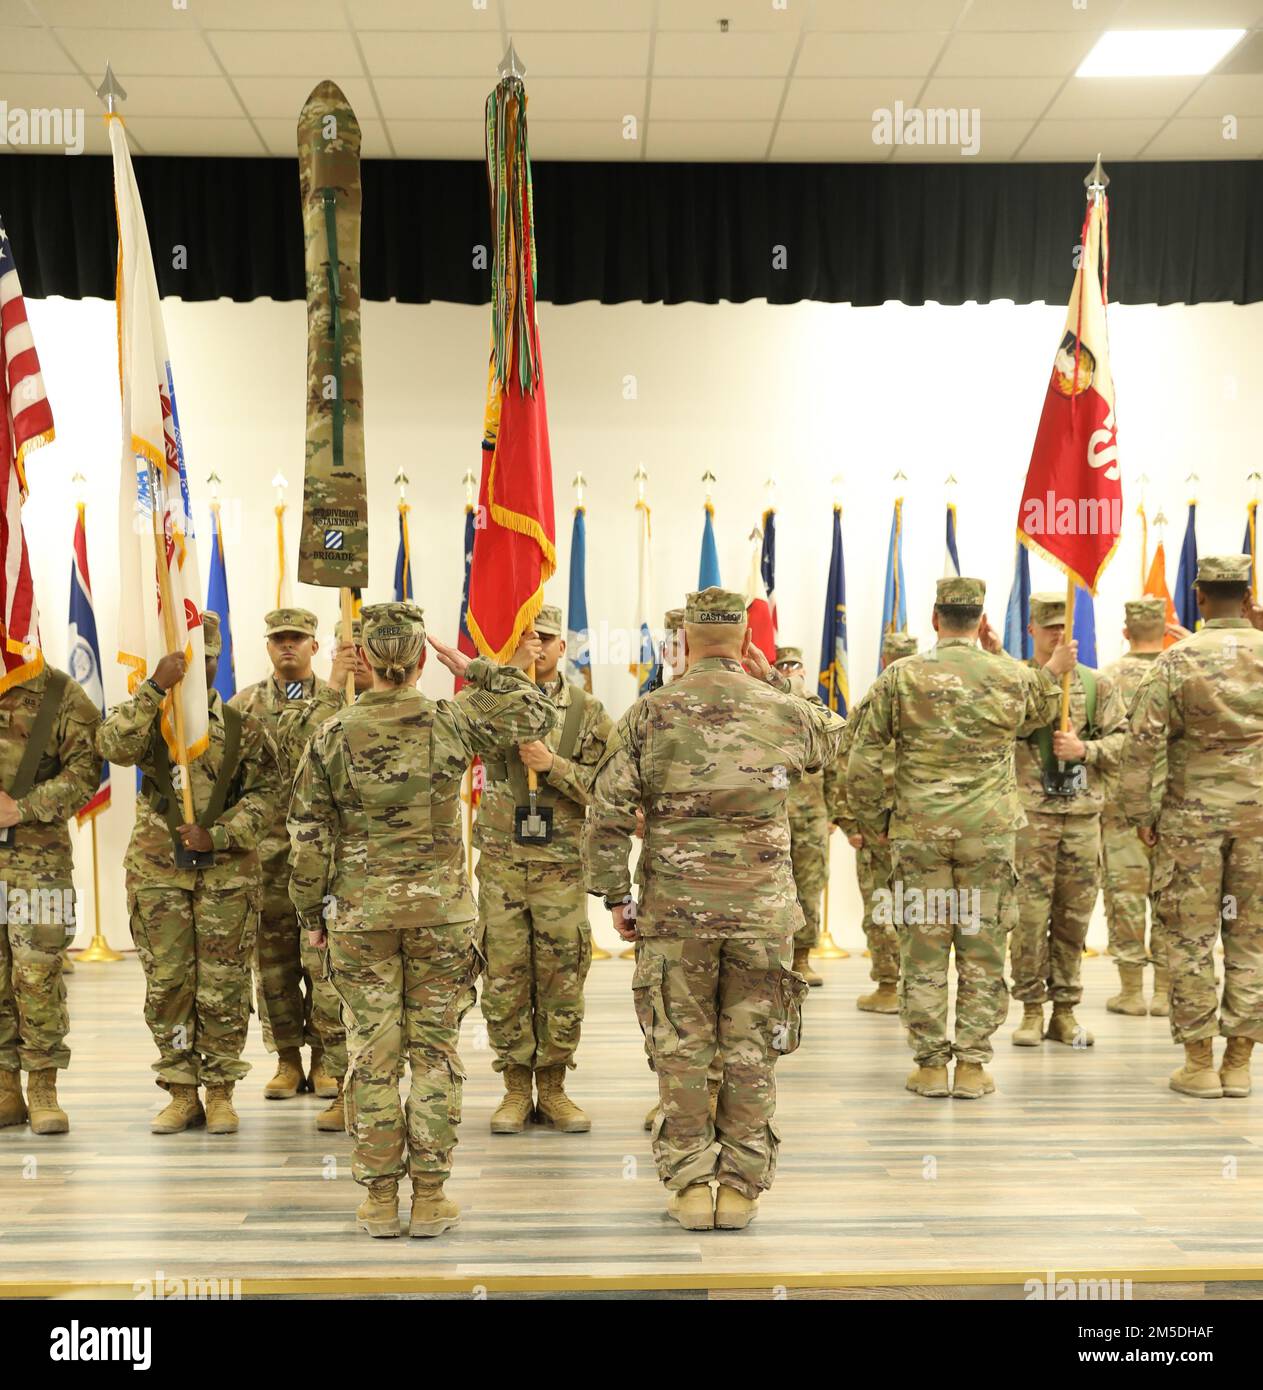 Col. Carrie L. Perez and Command Sgt. Maj. Ernesto Castillo of 36th Sustainment Brigade Accepted authority from 3rd Division Sustainment Brigade, 3rd Infantry Division’s Col. David Key and Command Sgt. Maj. Denice Malave by hosting a Transfer of Authority Ceremony on March 04, 2022 on Camp Arifjan, Kuwait. Stock Photo